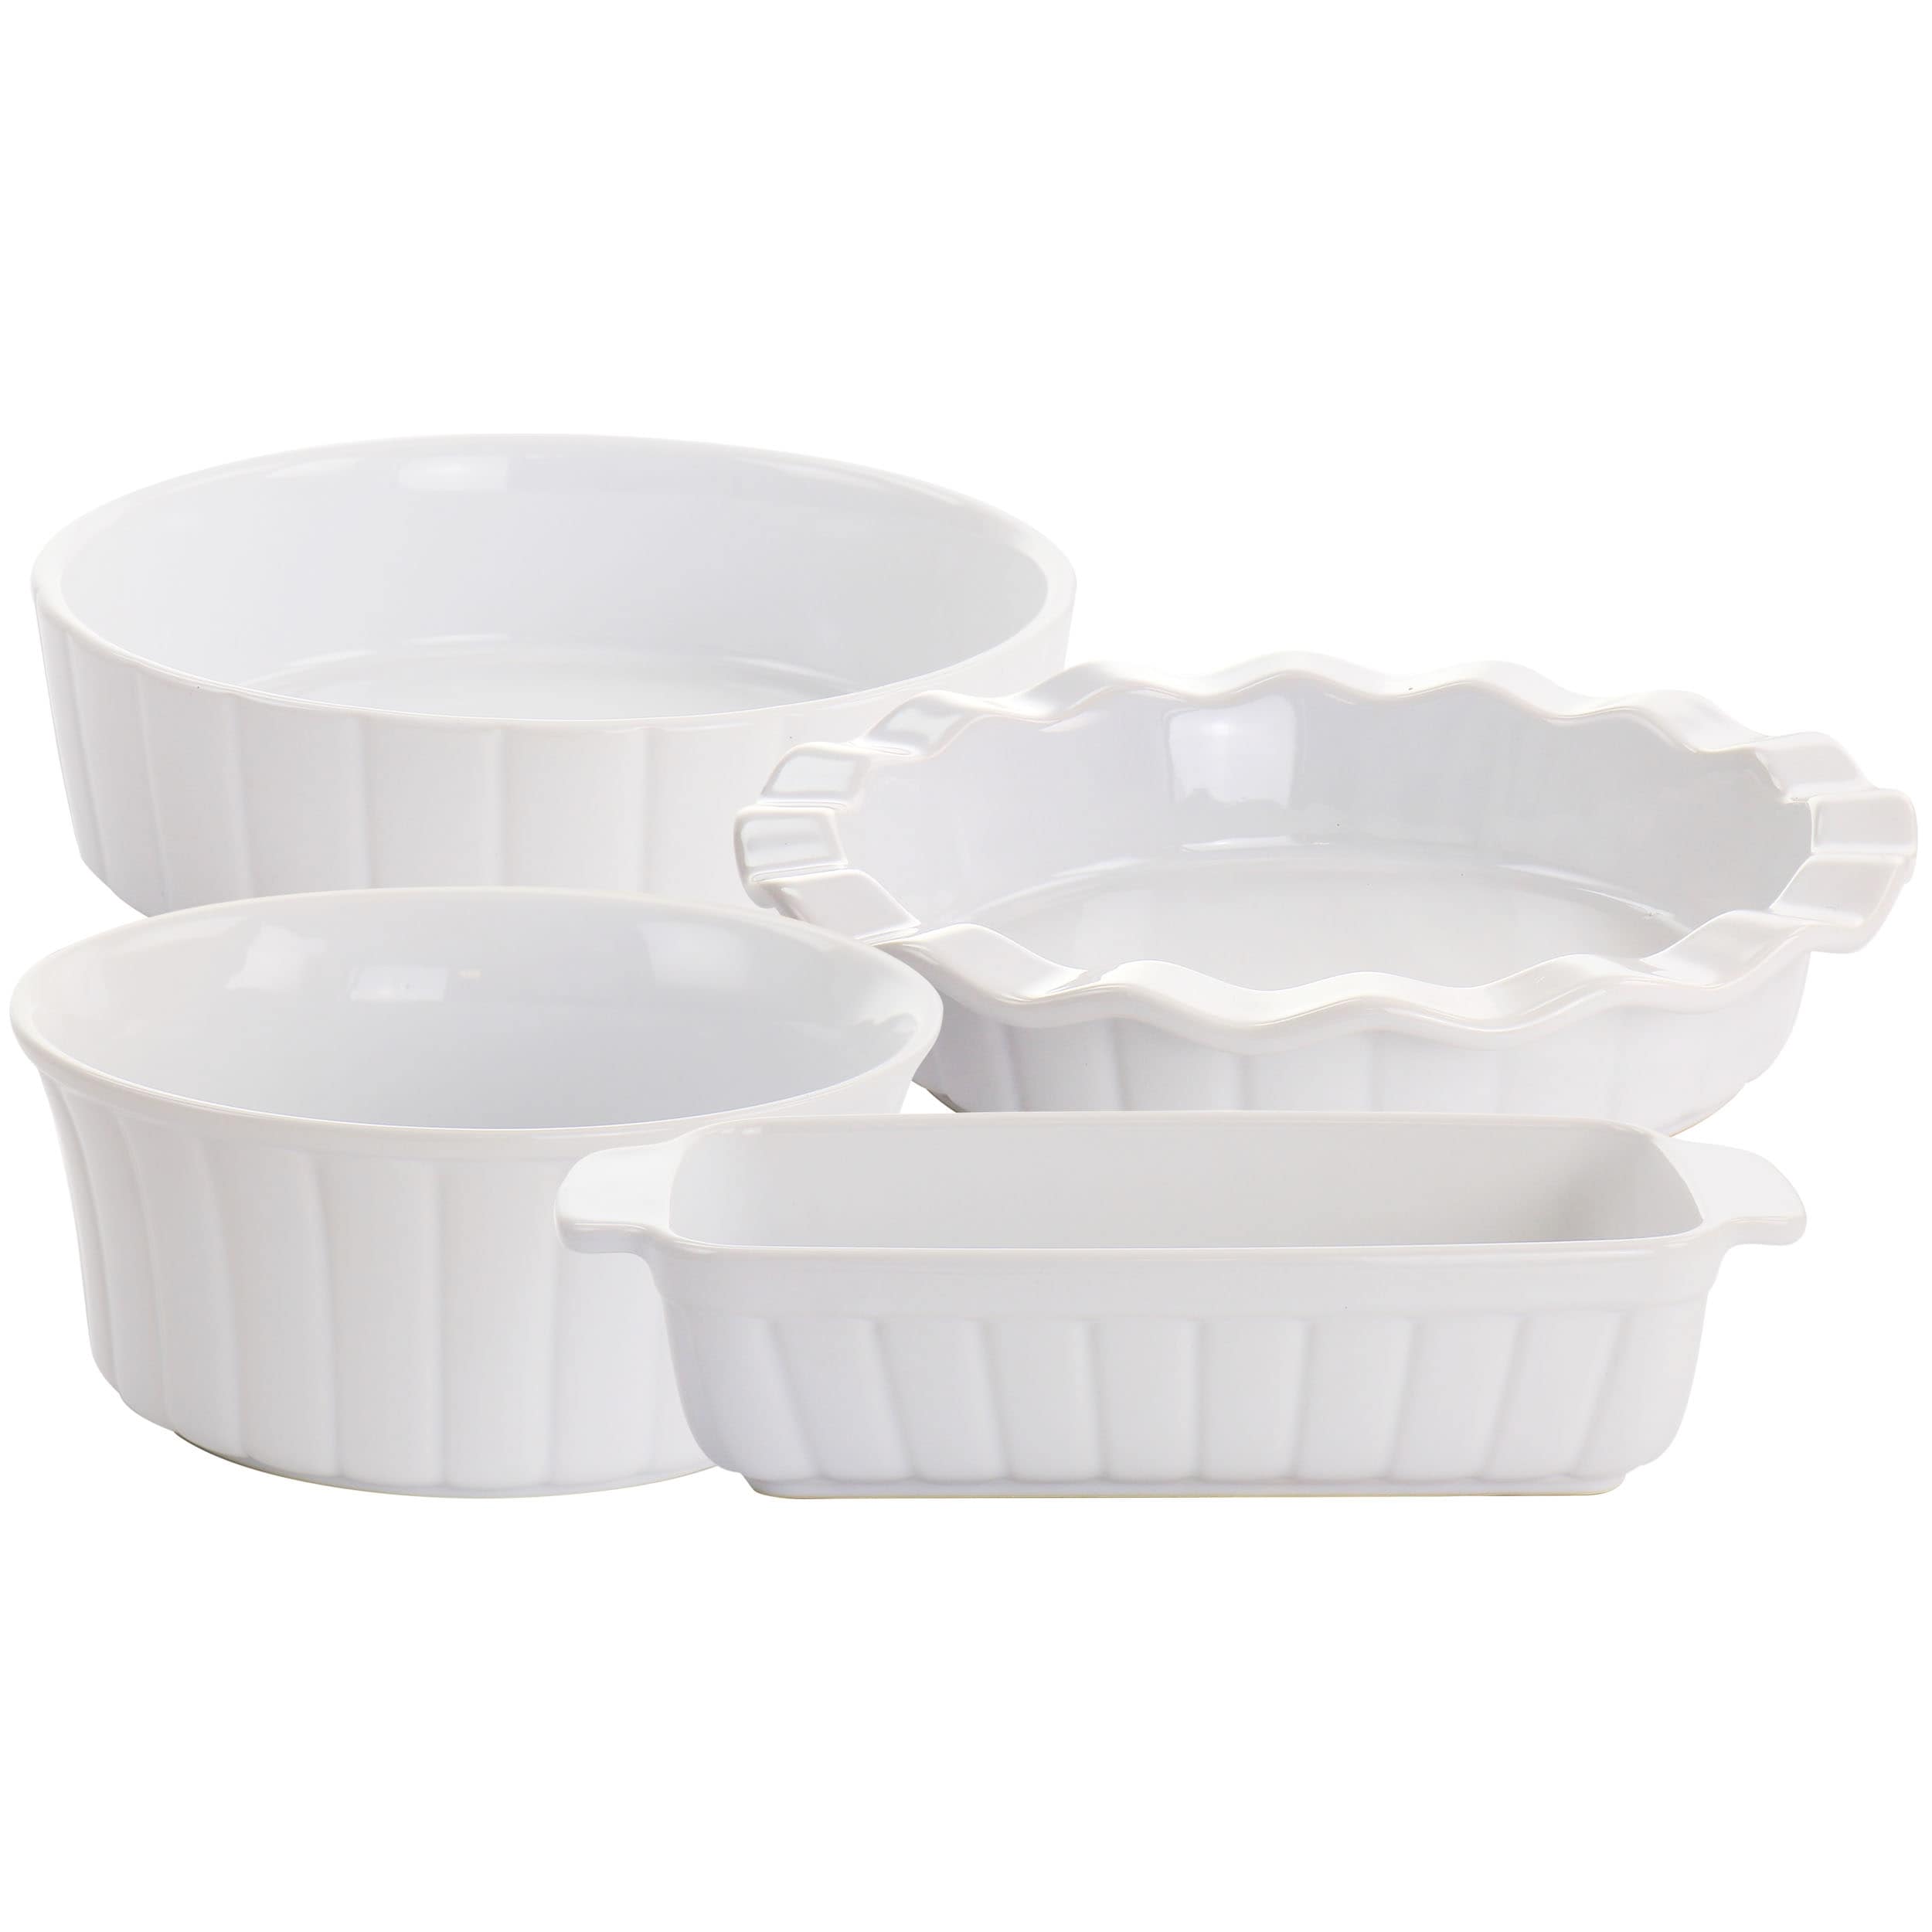 https://ak1.ostkcdn.com/images/products/is/images/direct/8358f9a7dc453cb498438aa62690b4ba550cc862/Gibson-Elite-Stoneware-Gracious-Dining-4-Piece-Bakeware-Set-in-White.jpg